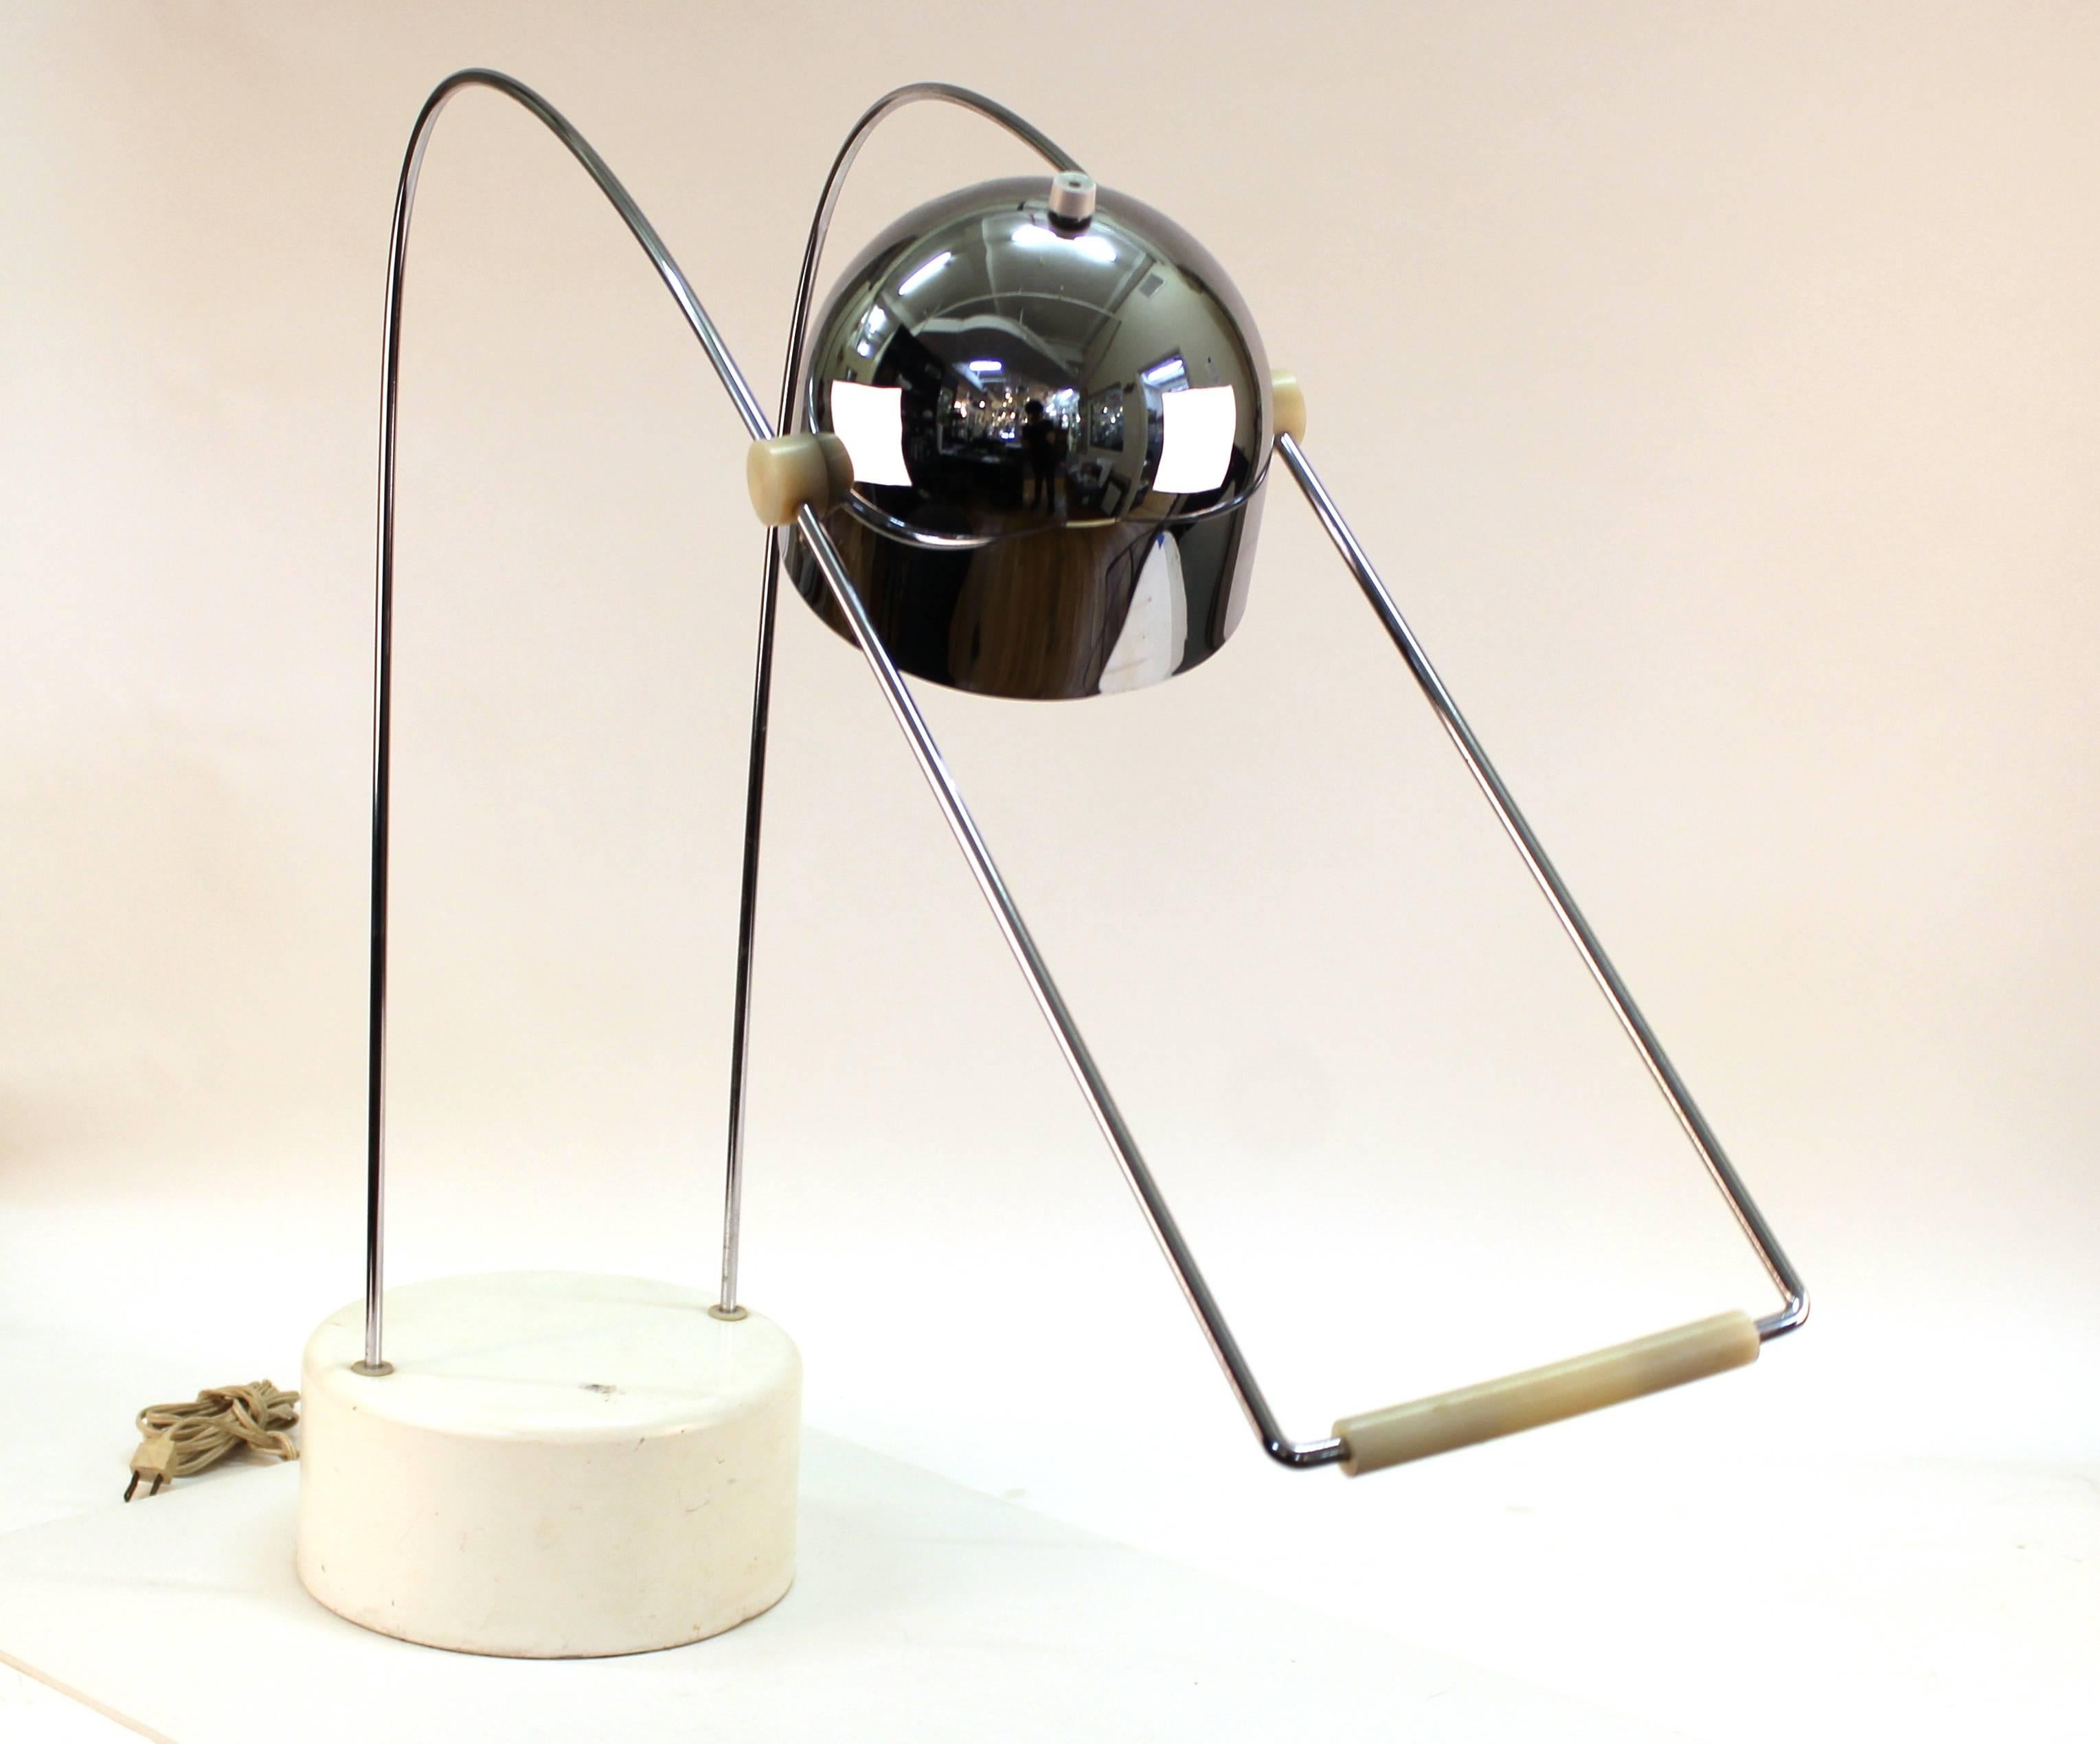 A modernist desk lamp with an adjustable chrome head. Some scraps and chips to the lamp's base, but overall the piece is in great vintage condition.